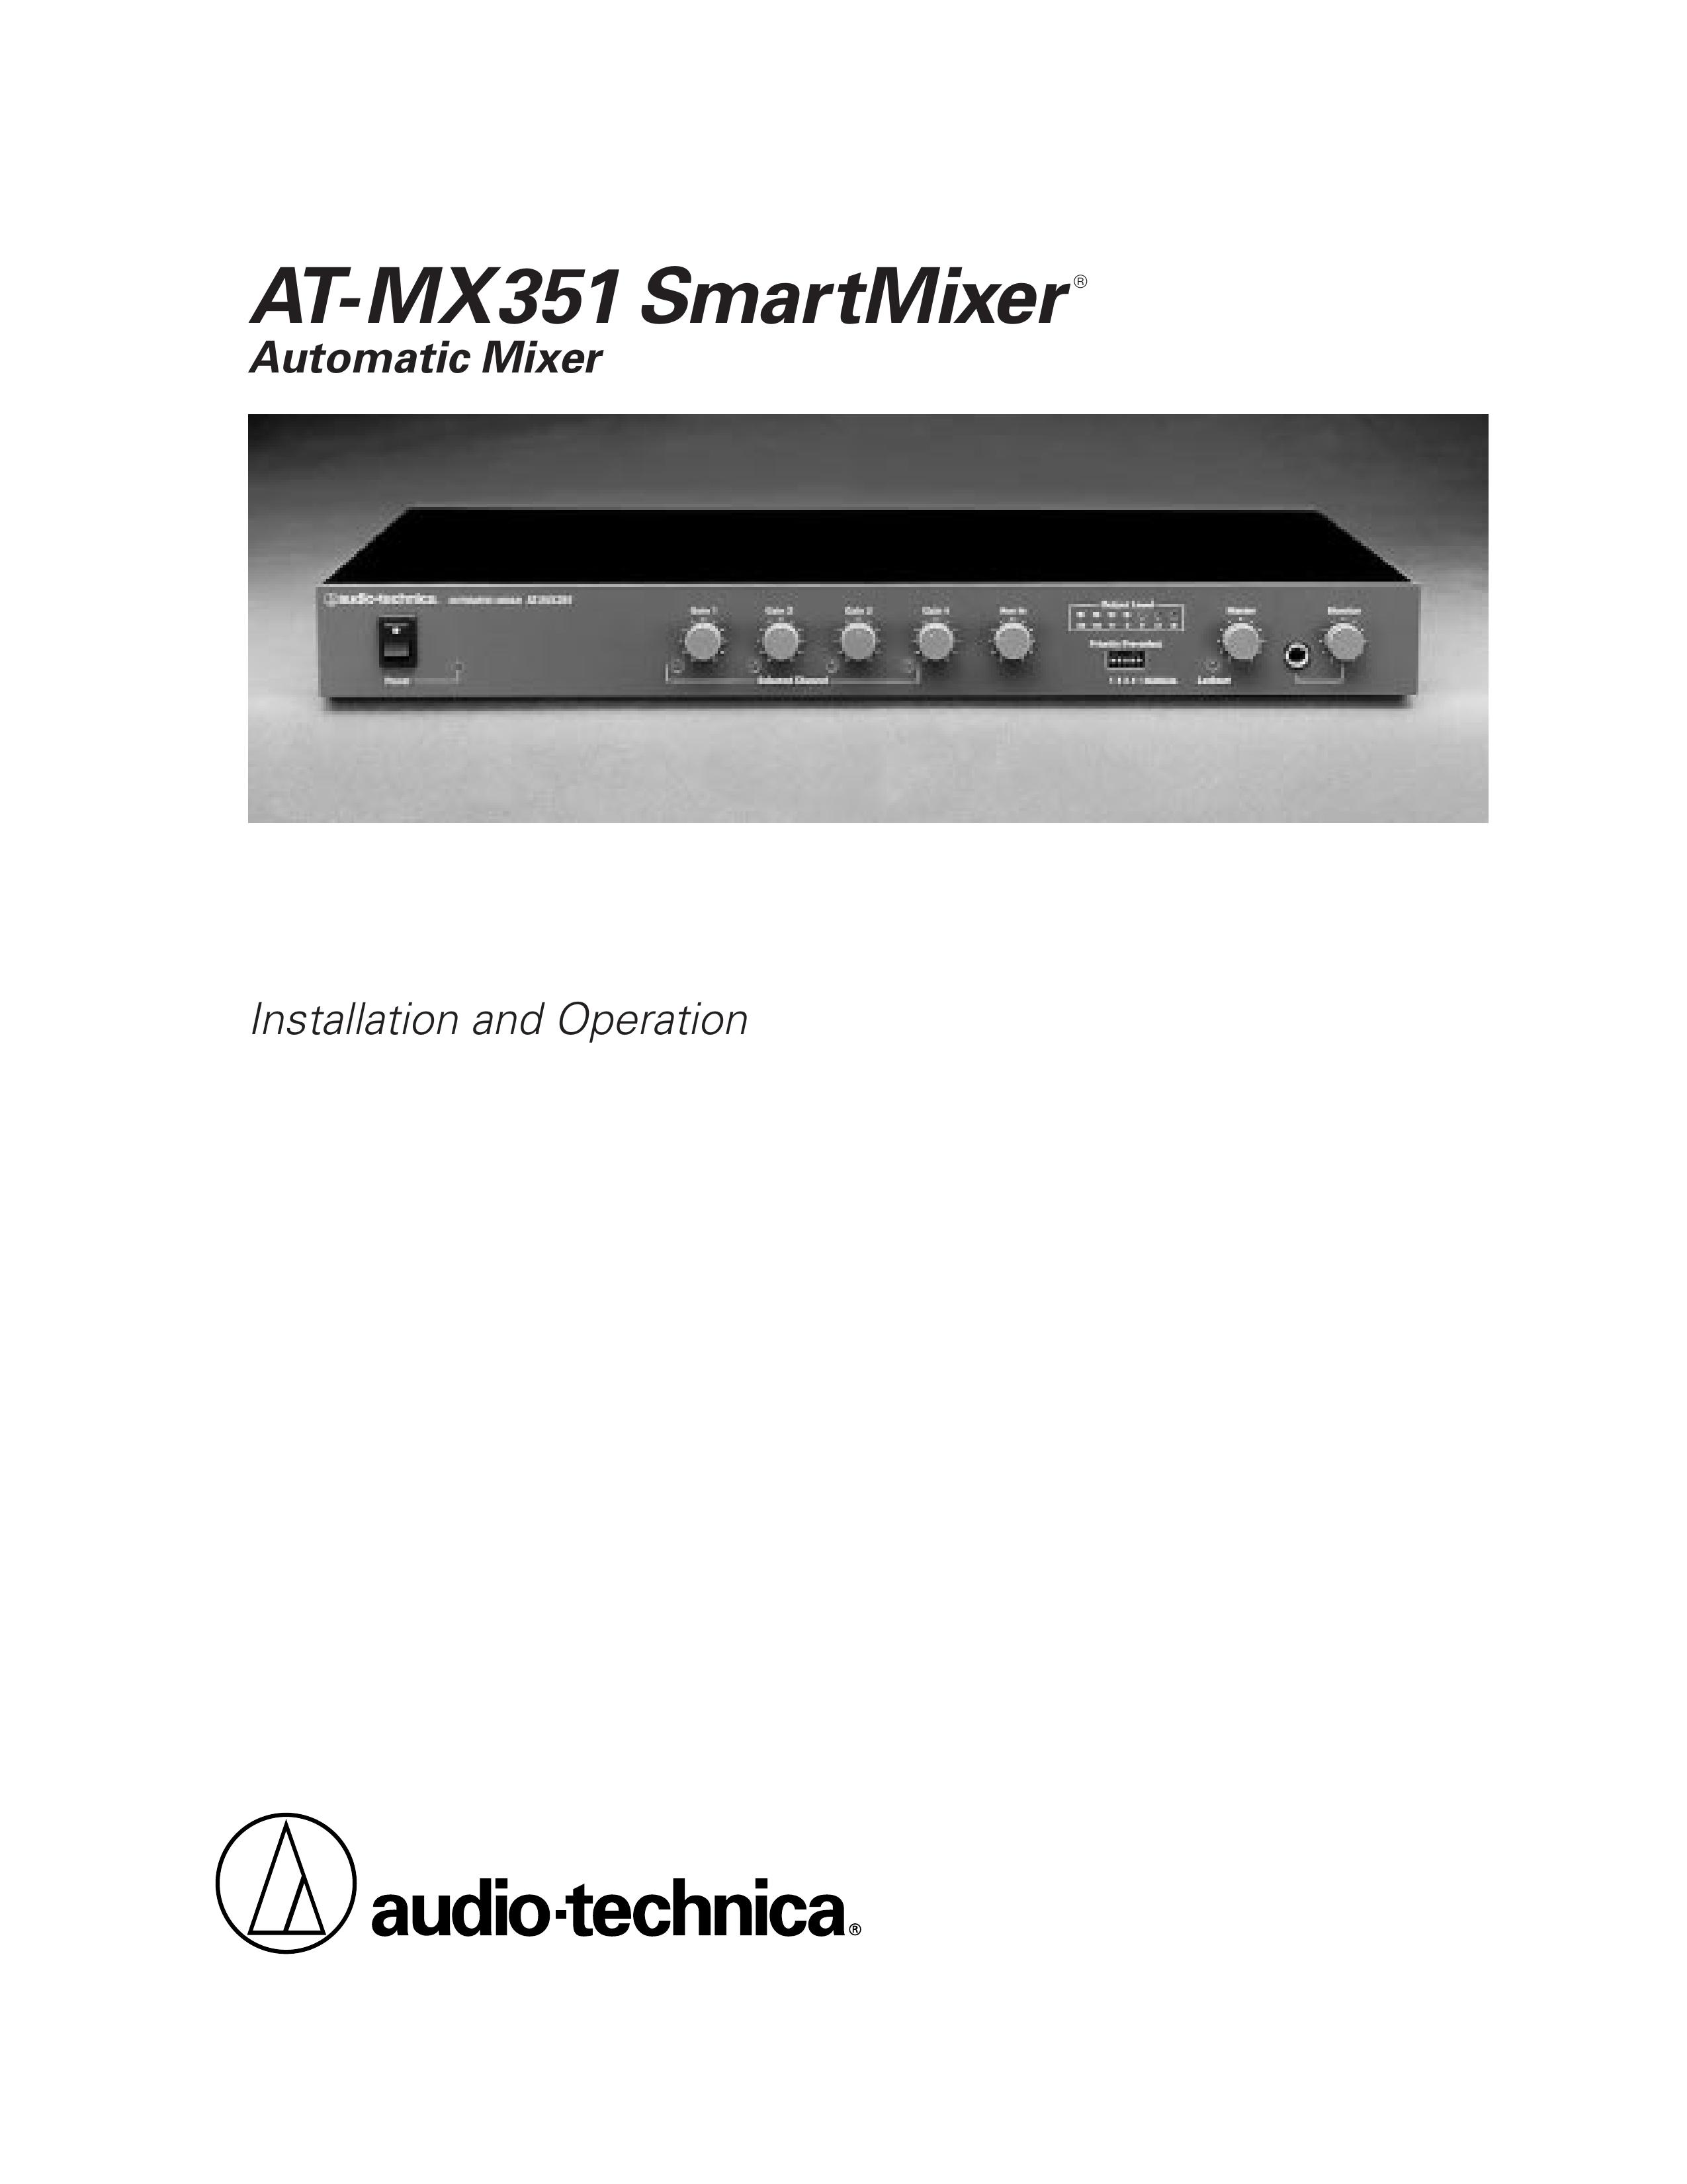 Audio-Technica AT-MX351 Musical Instrument User Manual (Page 1)